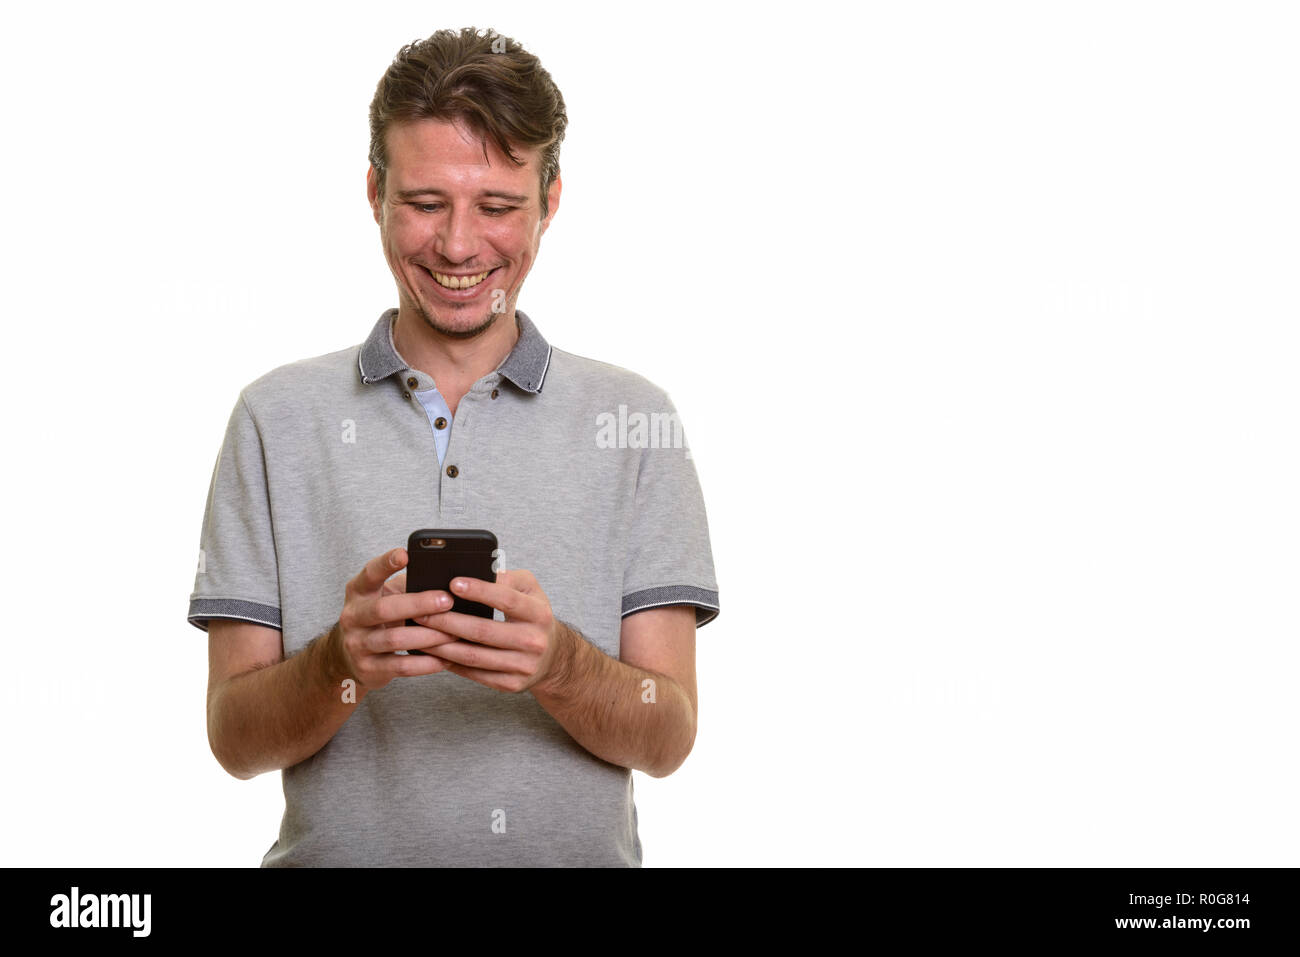 Portrait of happy Young man using mobile phone Banque D'Images